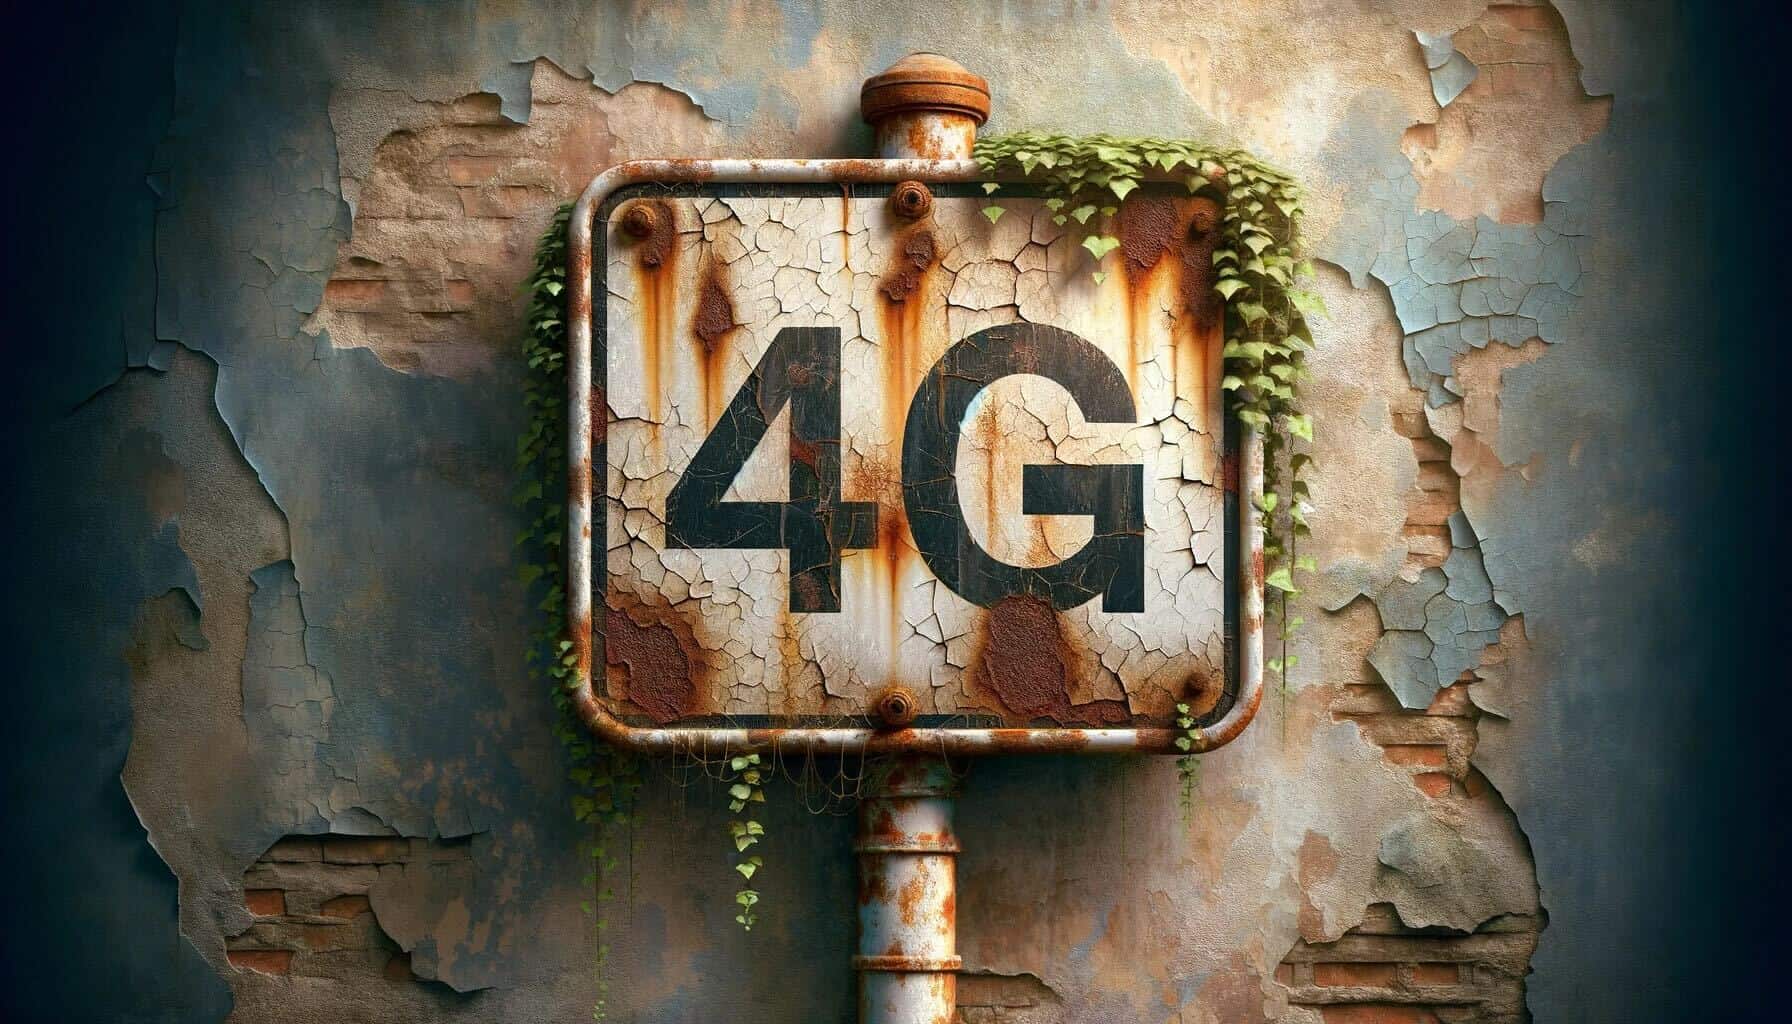 Decaying sign with the words “4G” on it